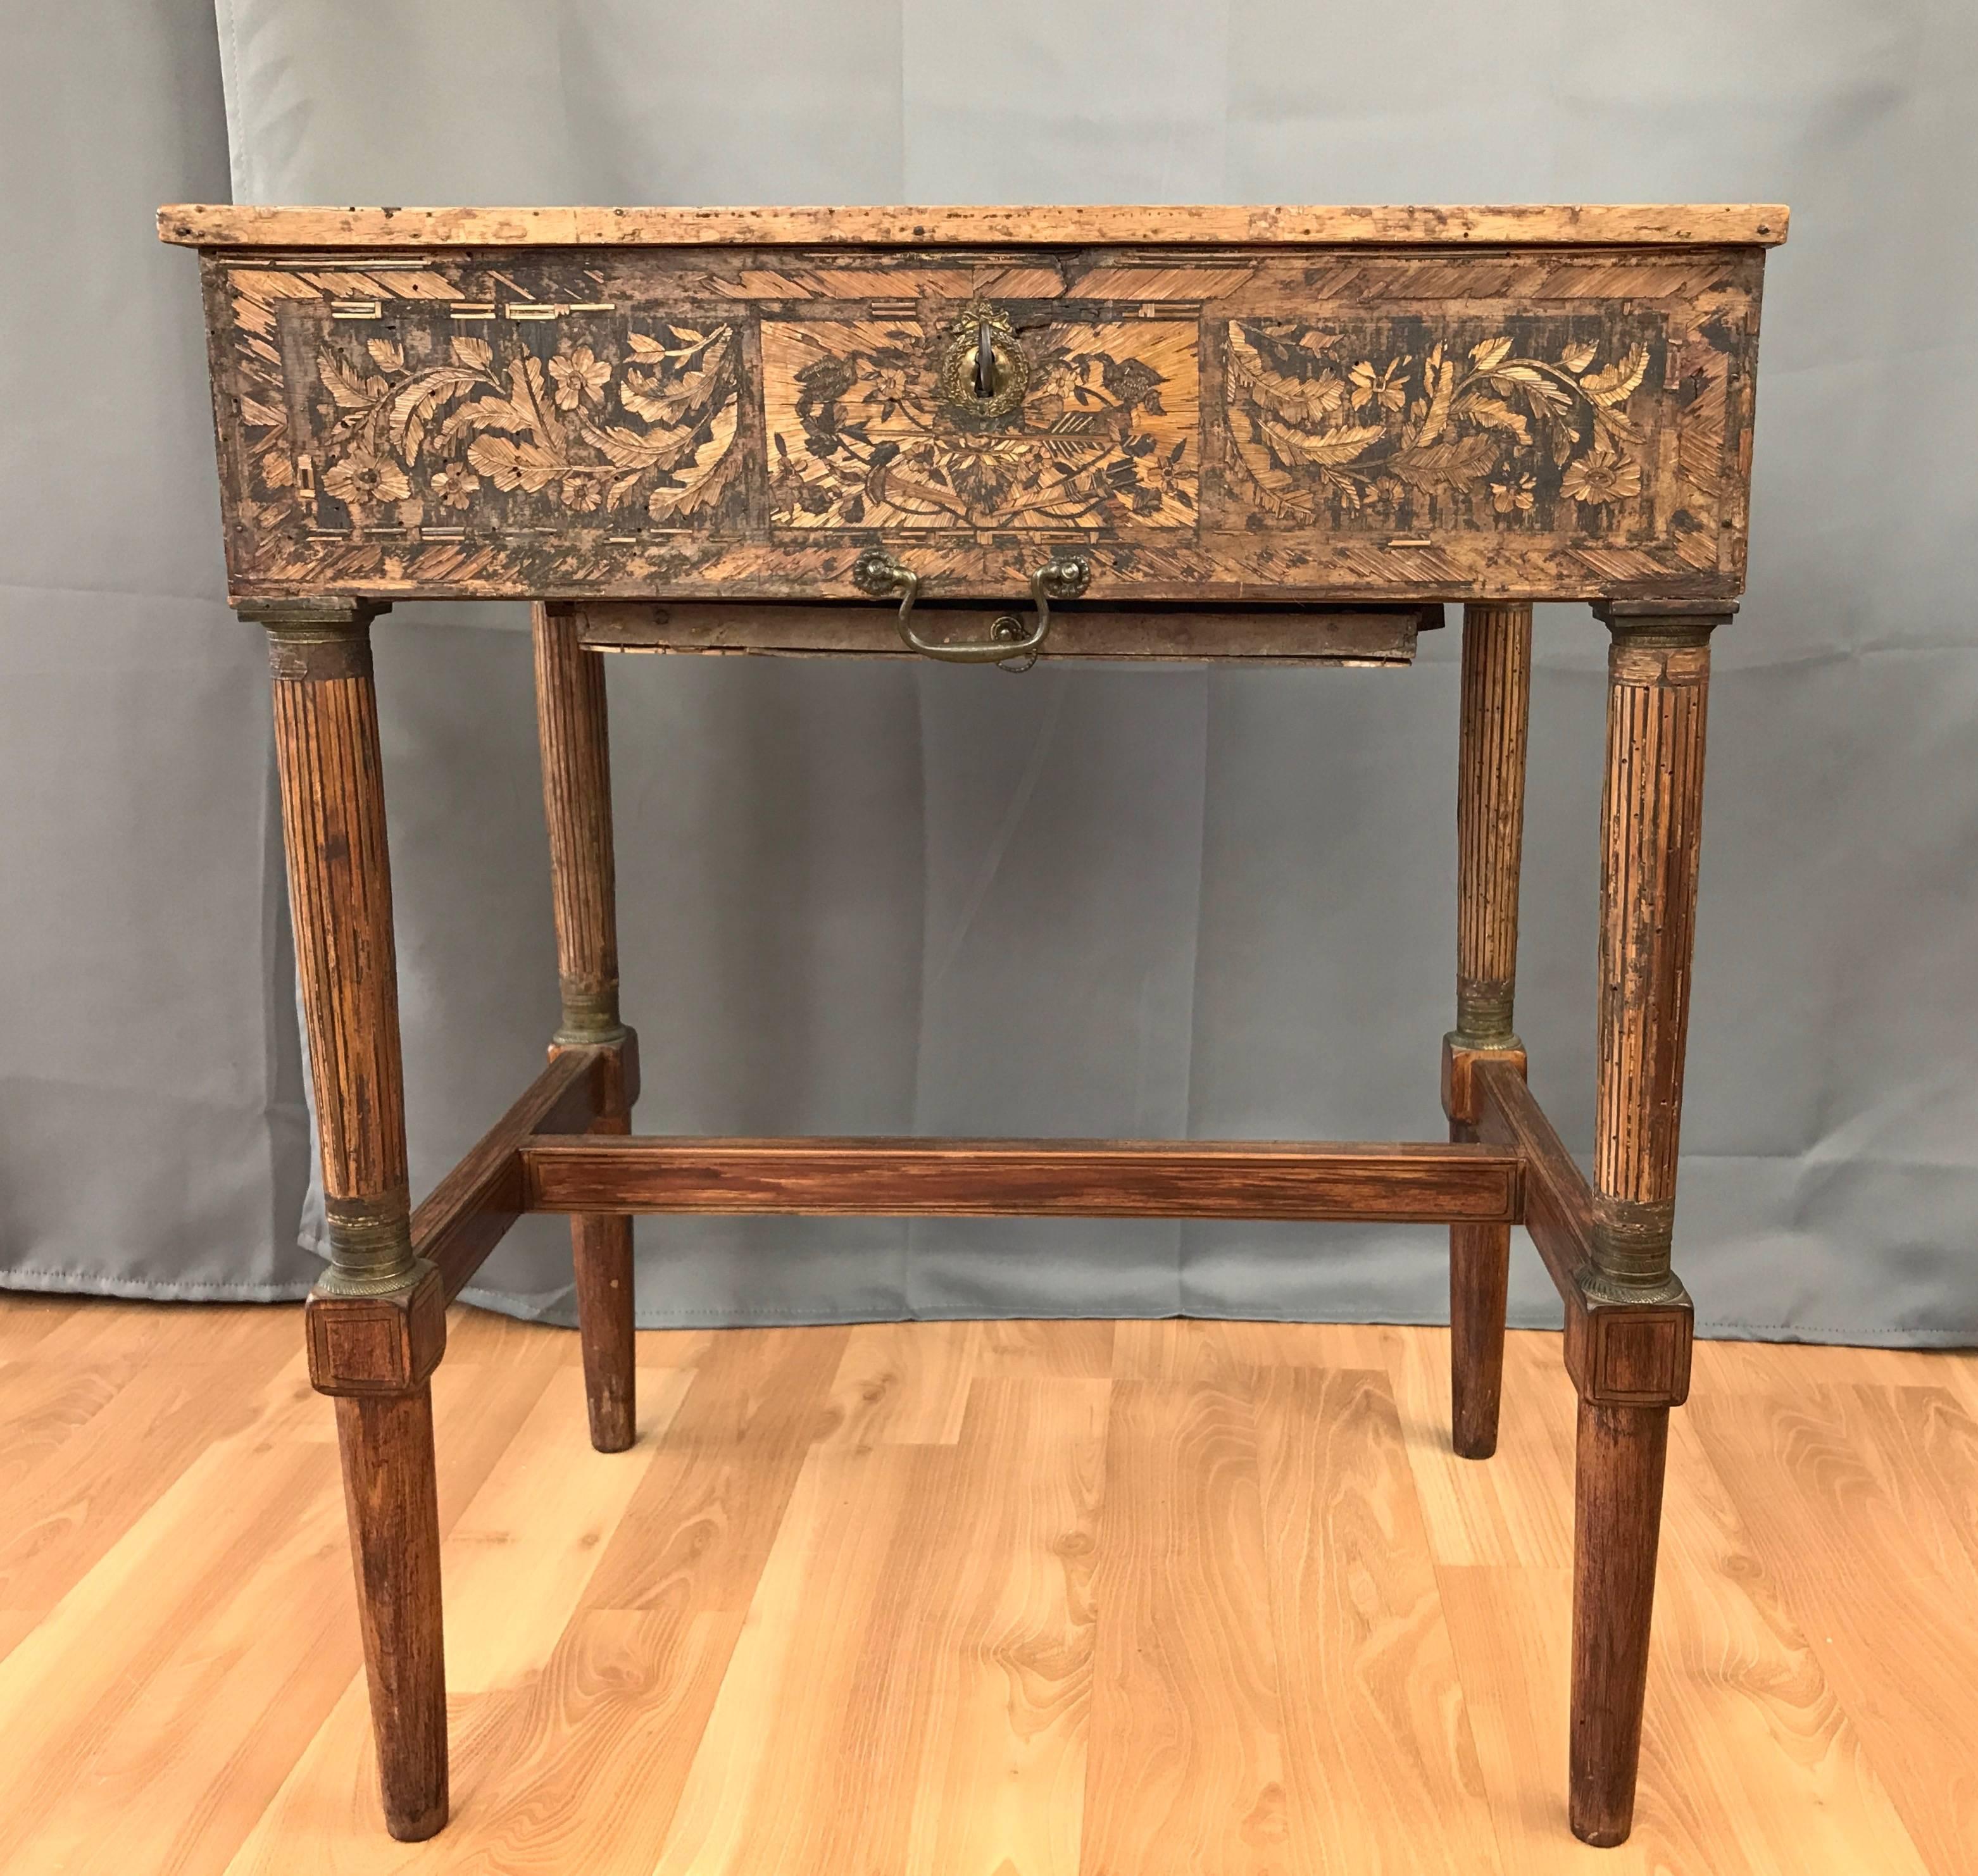 Napoleon III Mid-19th Century French Straw Work Marquetry Game Table